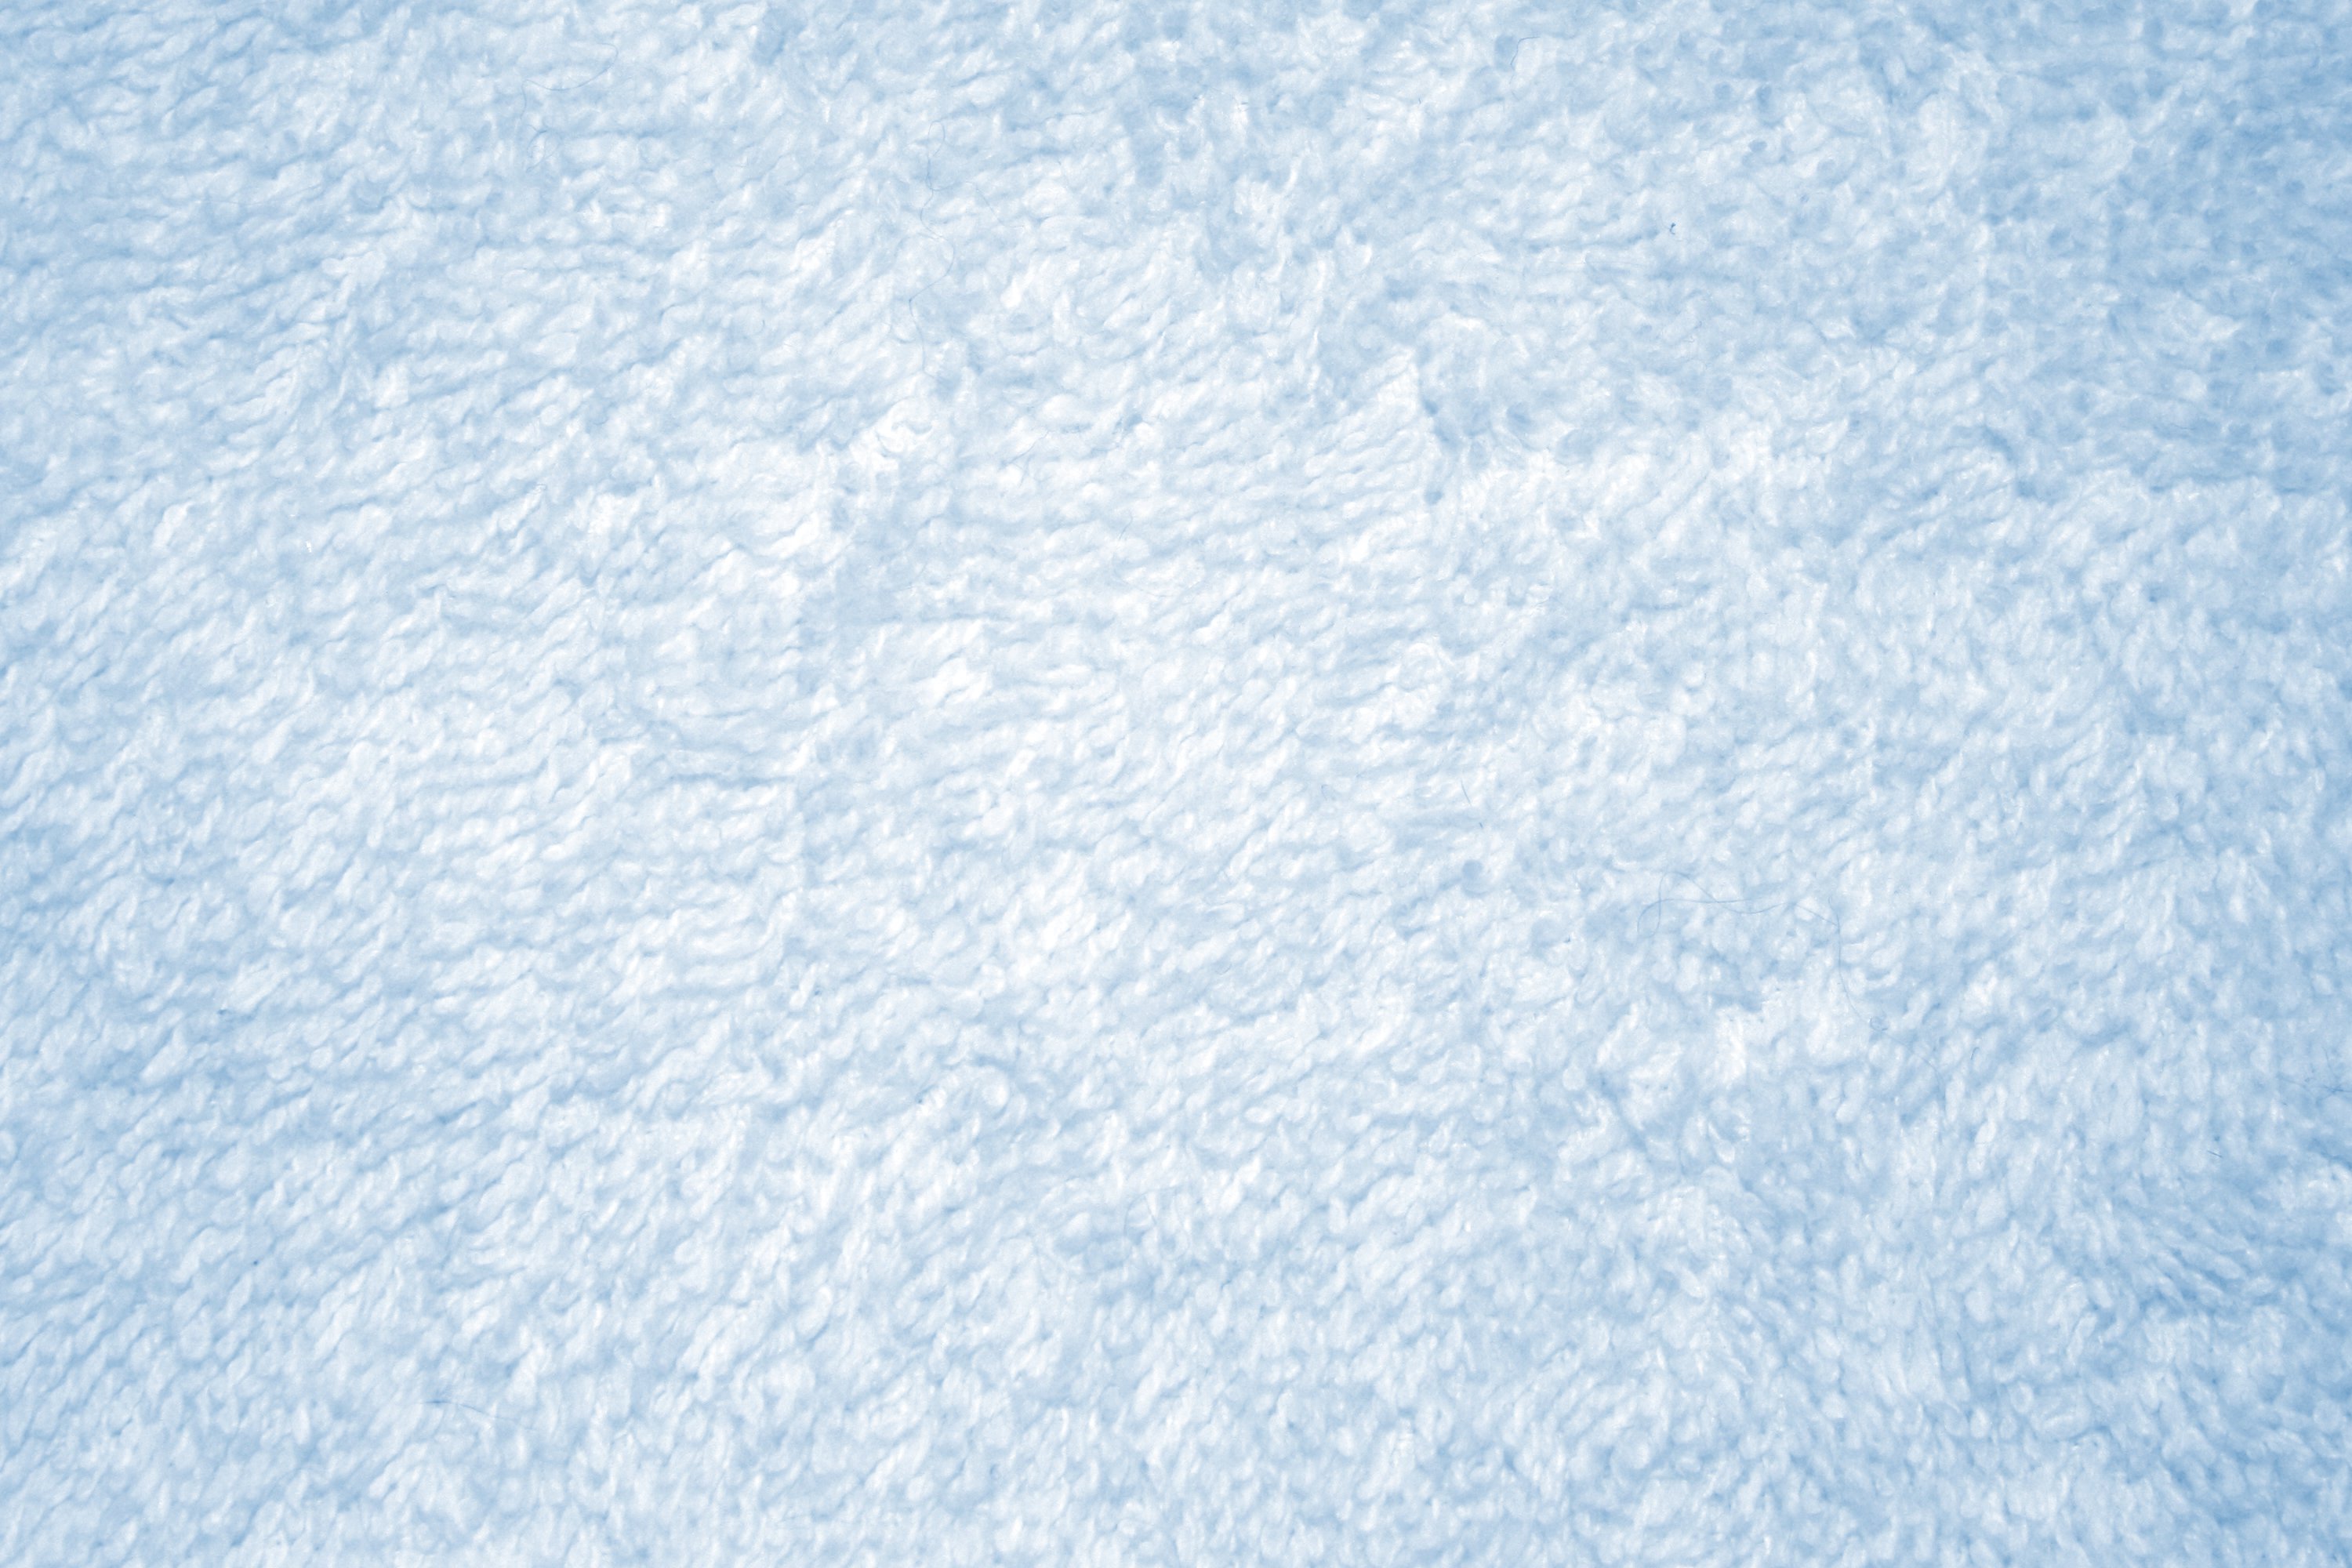 Light Blue Terry Cloth Texture Picture Free Photograph Photos